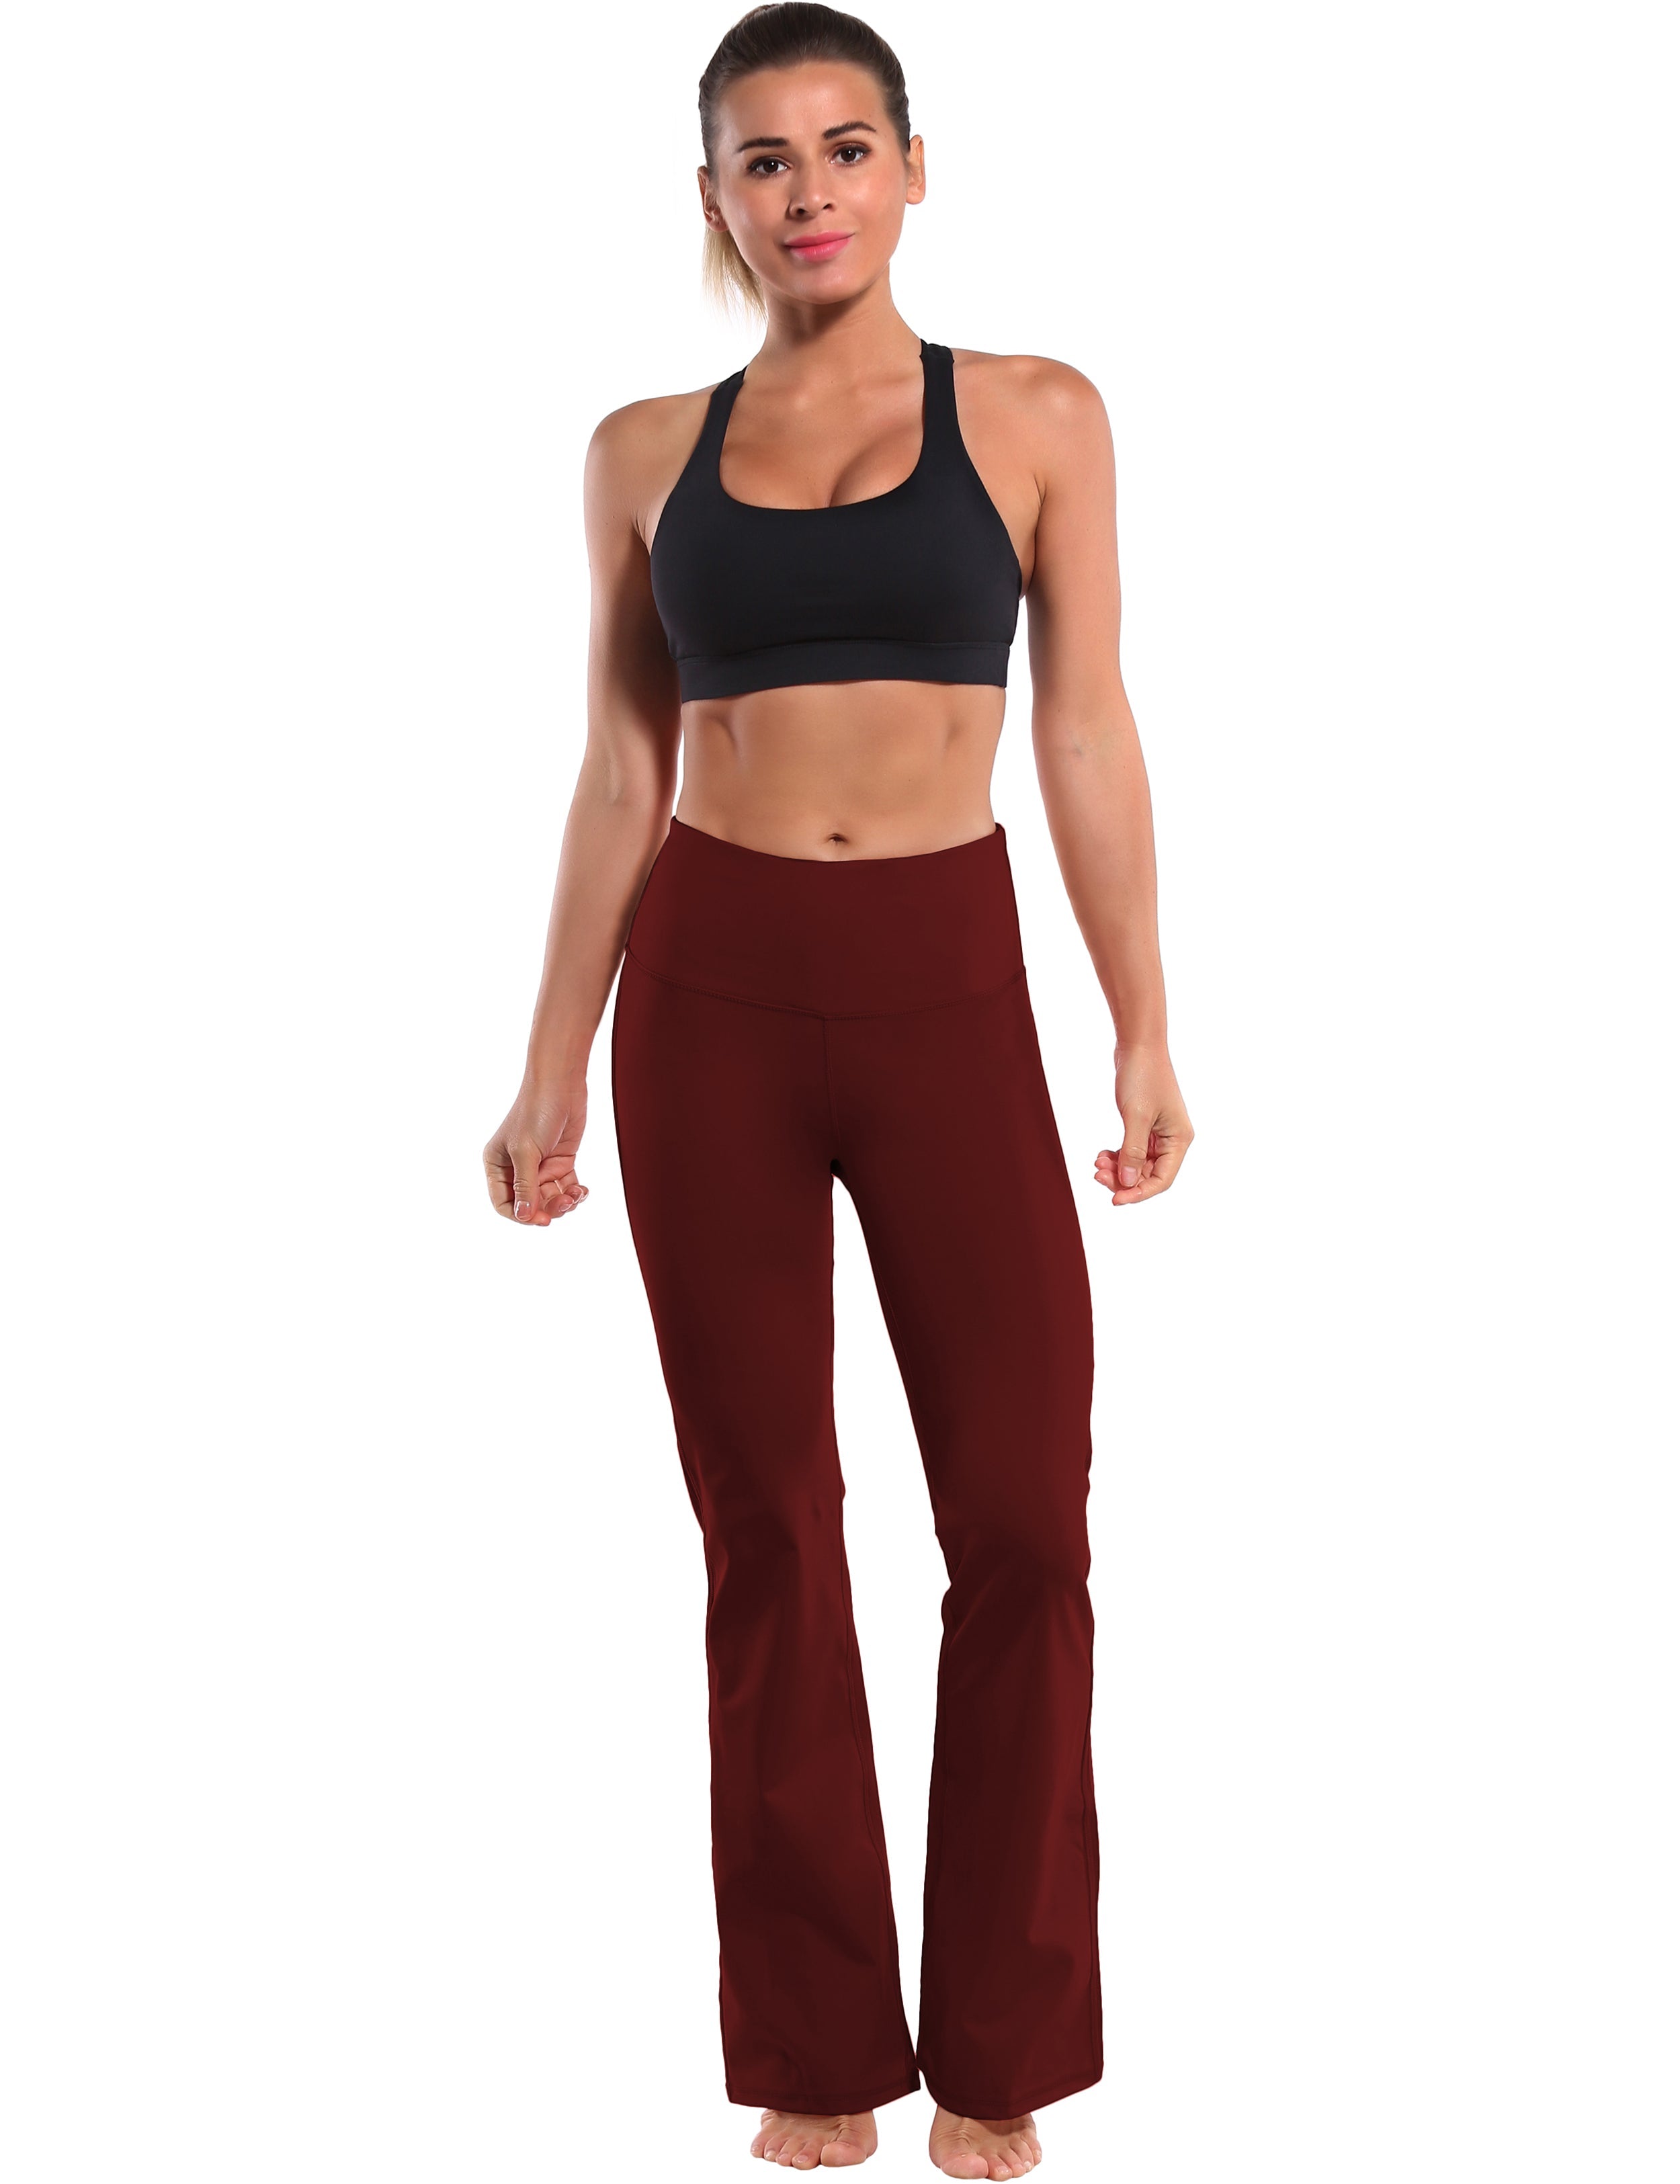 High Waist Bootcut Leggings Cherryred 75%Nylon/25%Spandex Fabric doesn't attract lint easily 4-way stretch No see-through Moisture-wicking Tummy control Inner pocket Five lengths